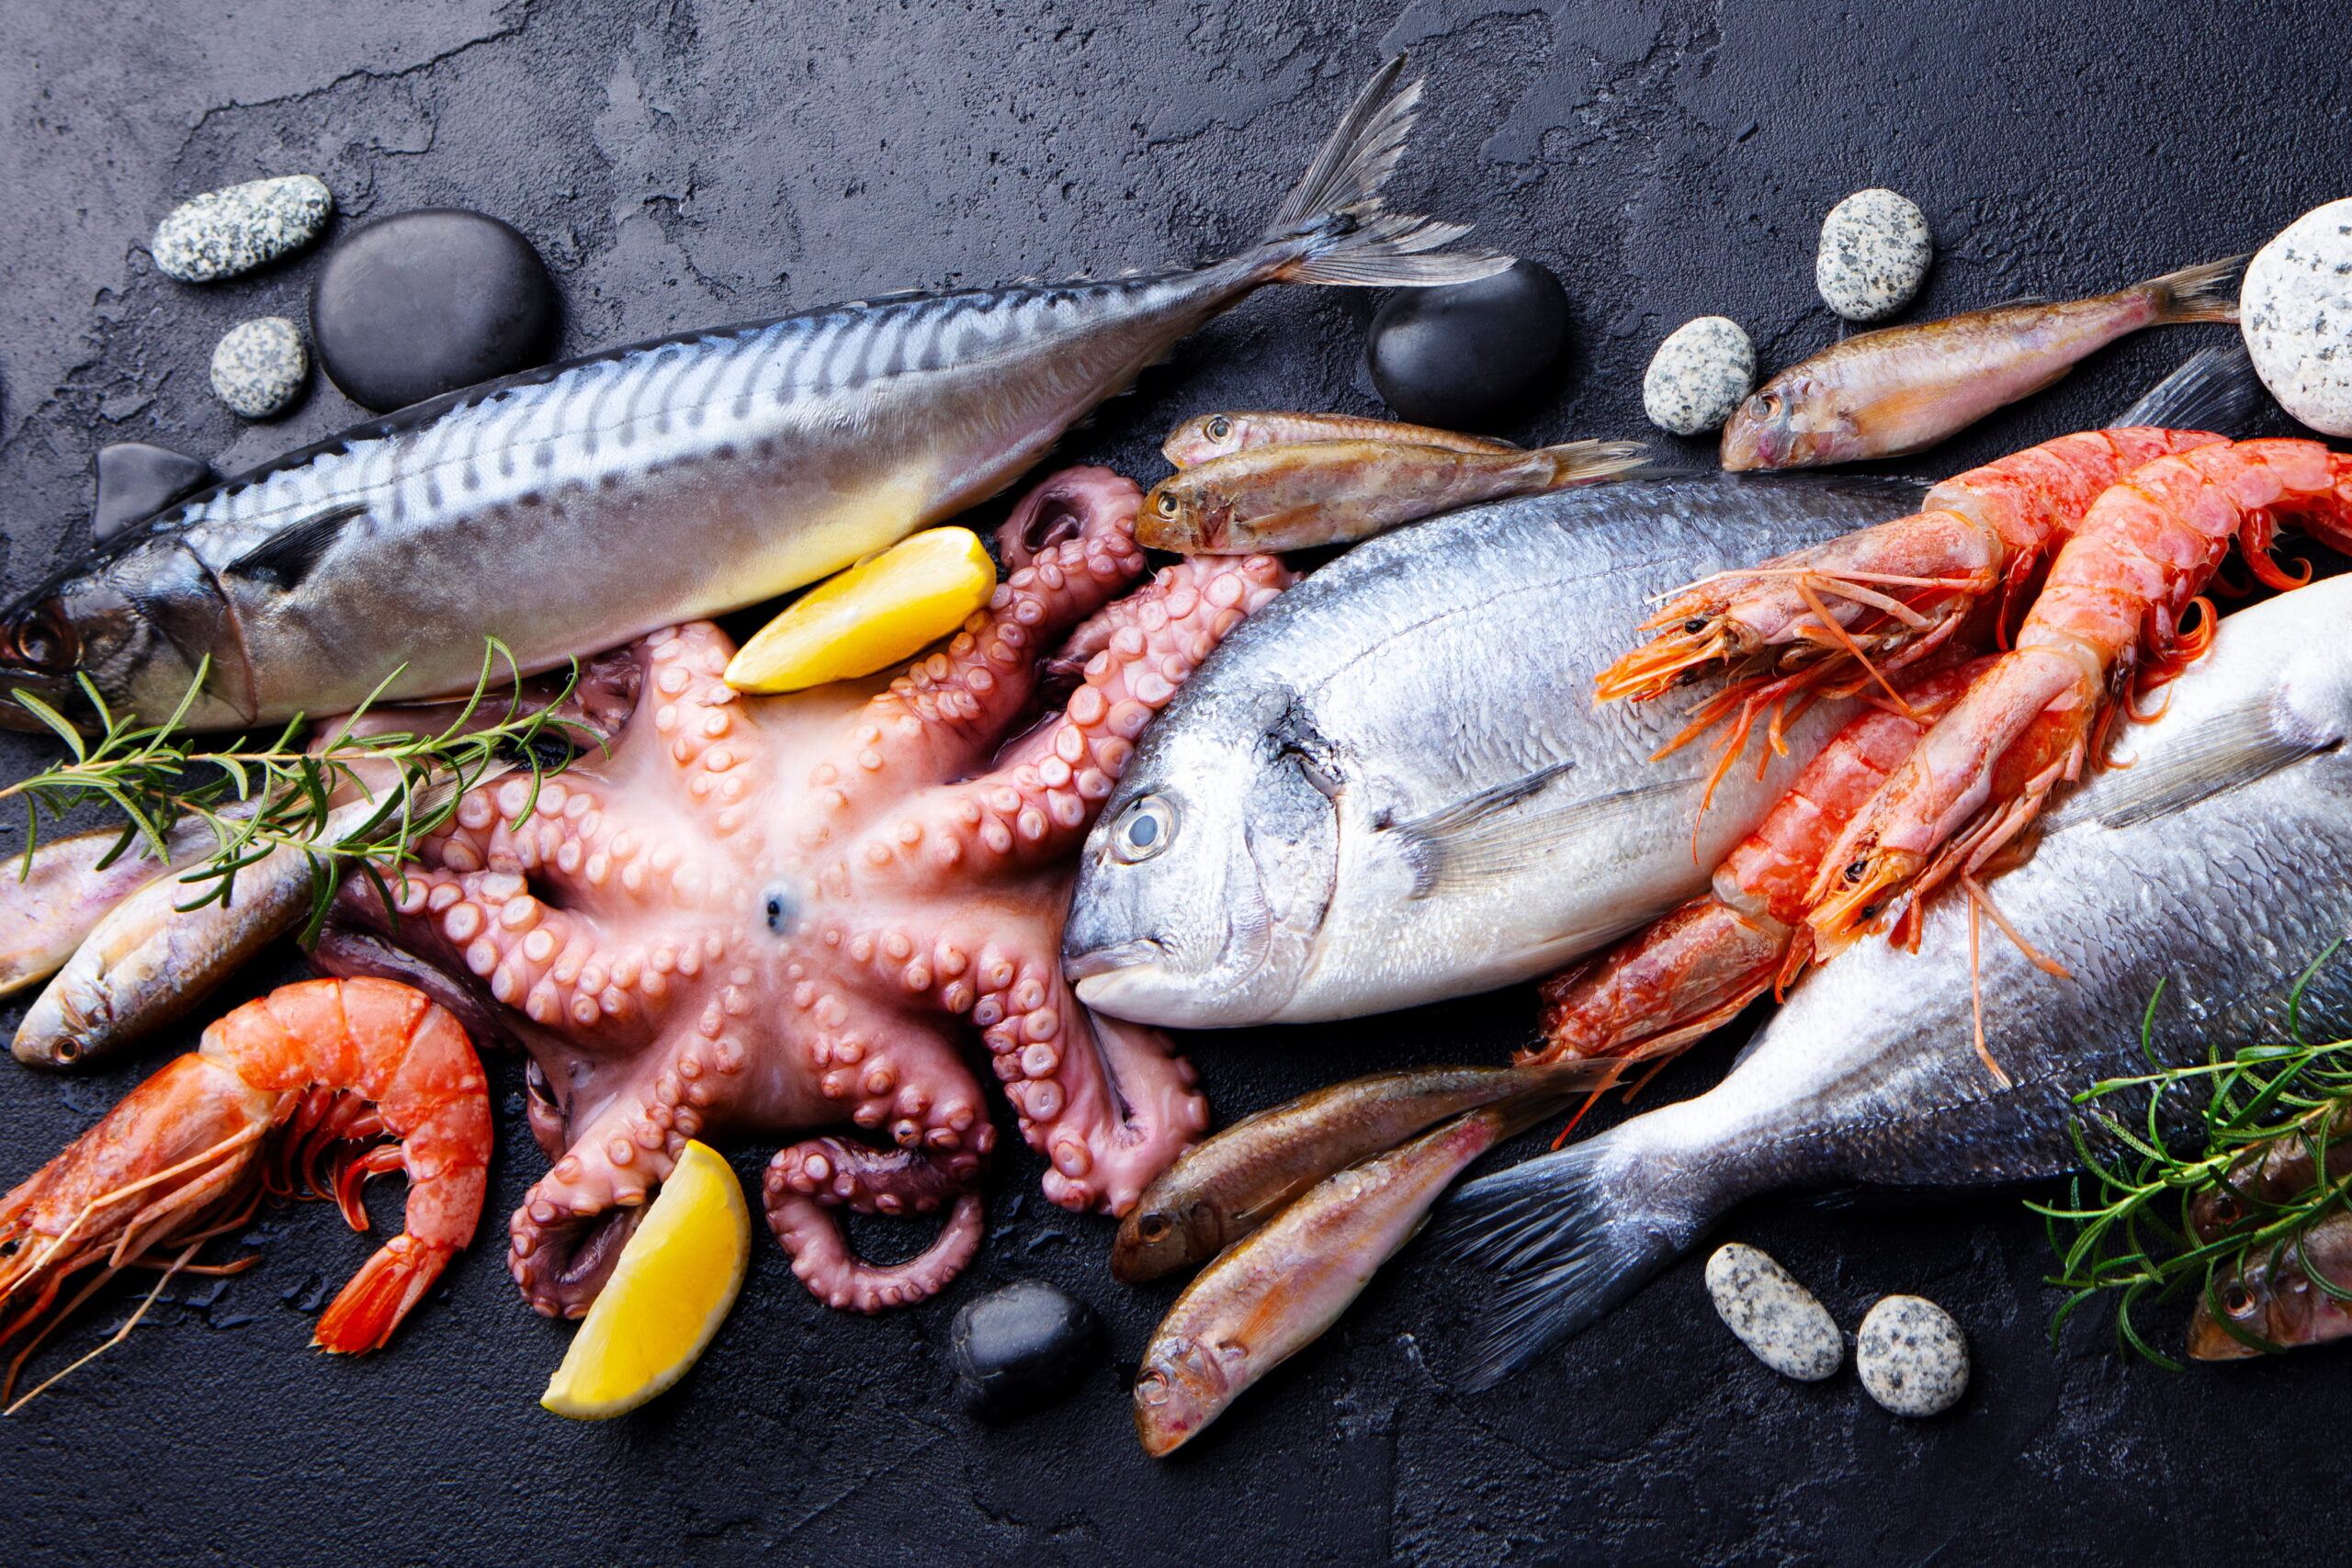 Fresh fish and seafood assortment on black slate background. Top view.